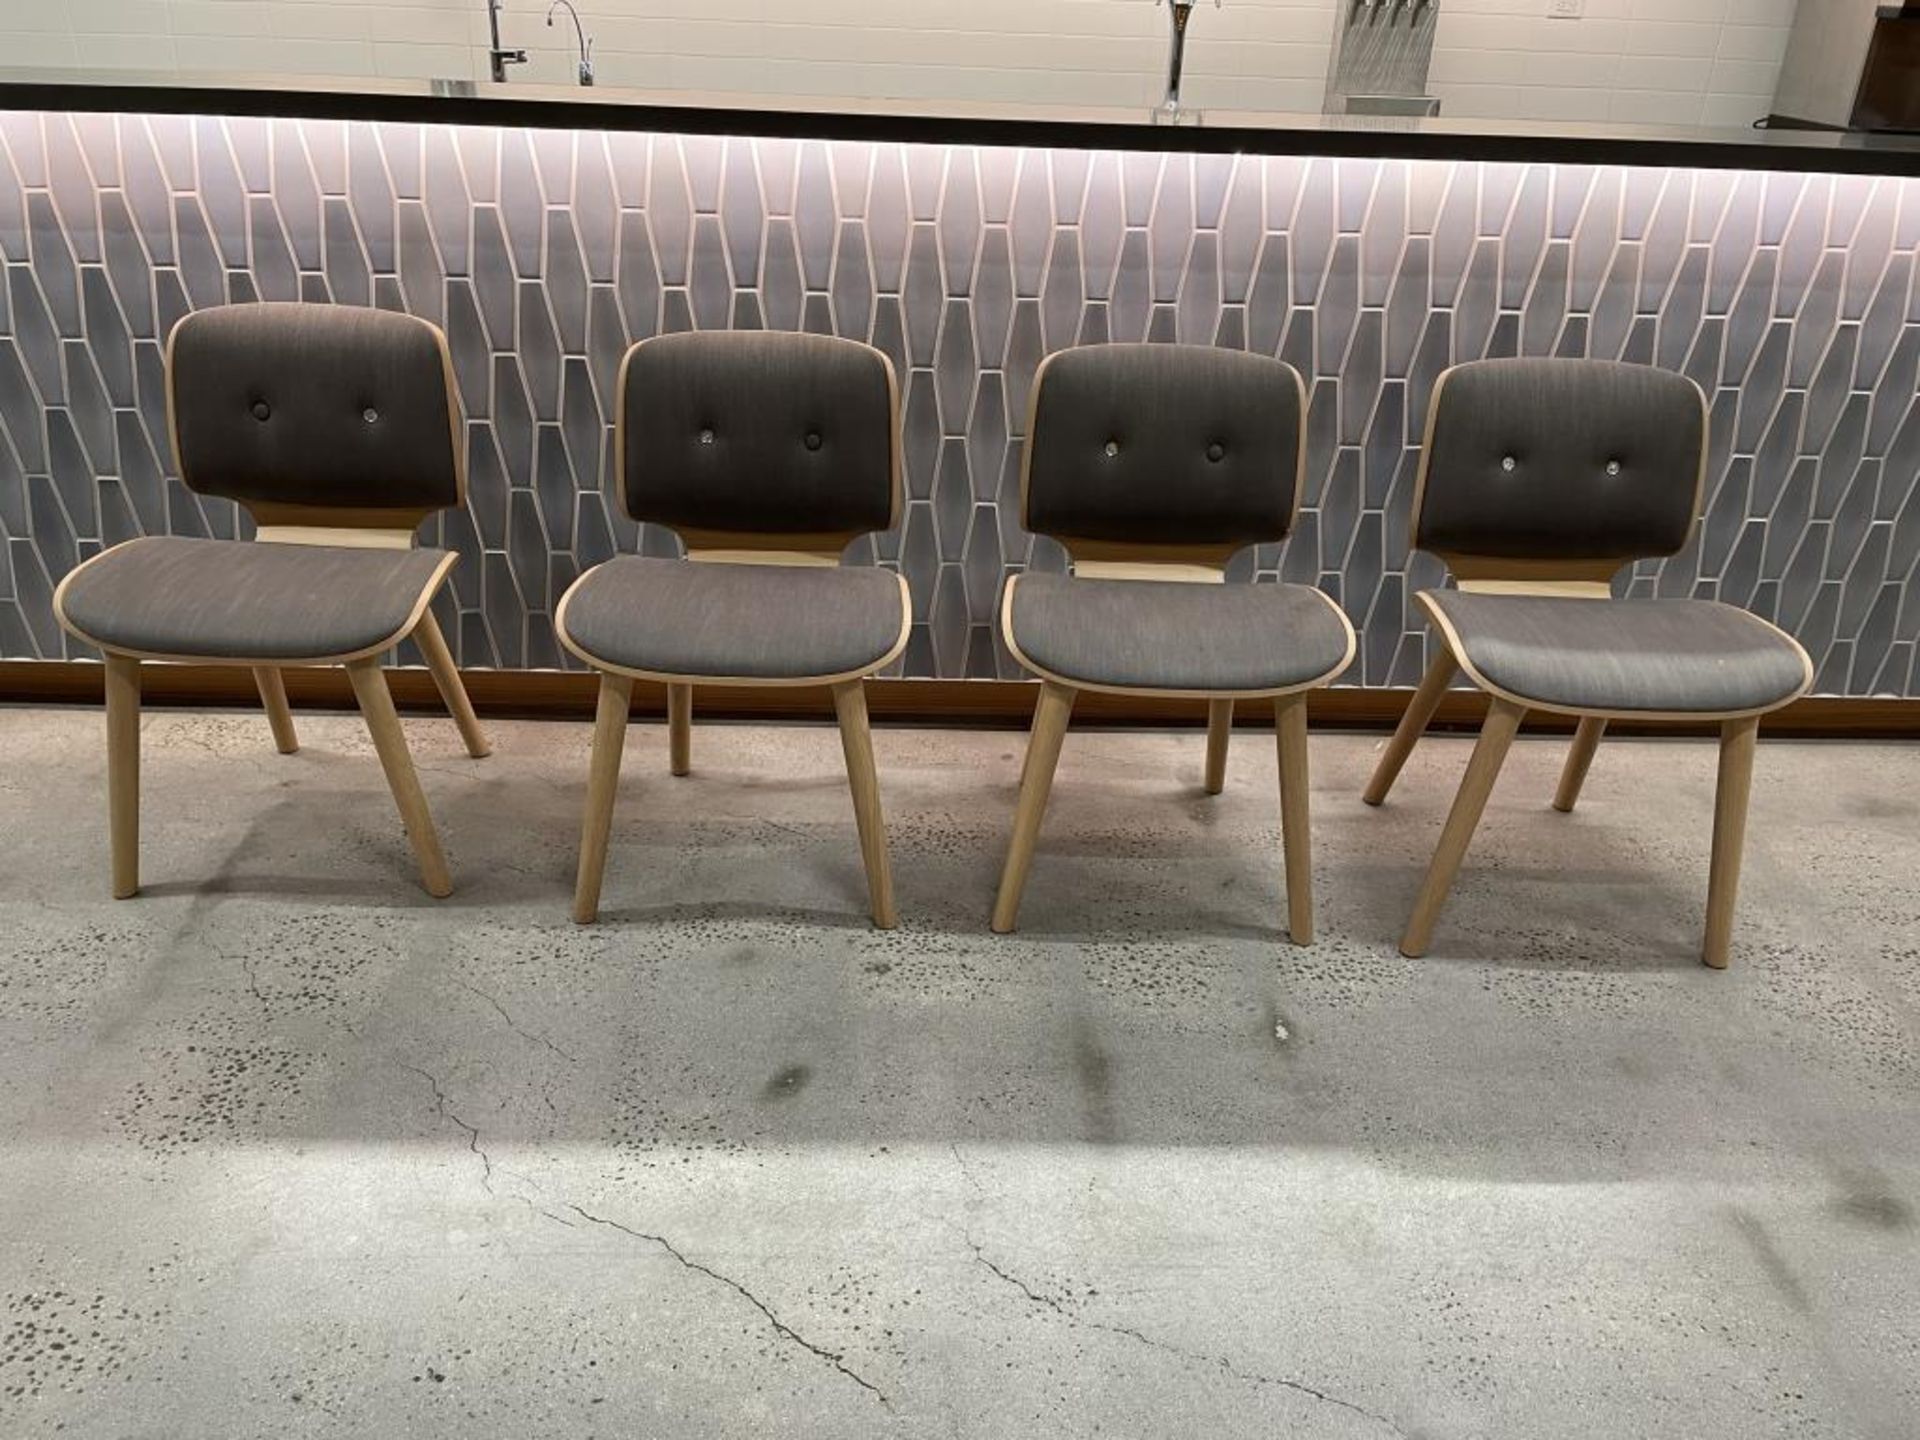 (4qty) Moooi Chairs "Buttons Need Replacing*